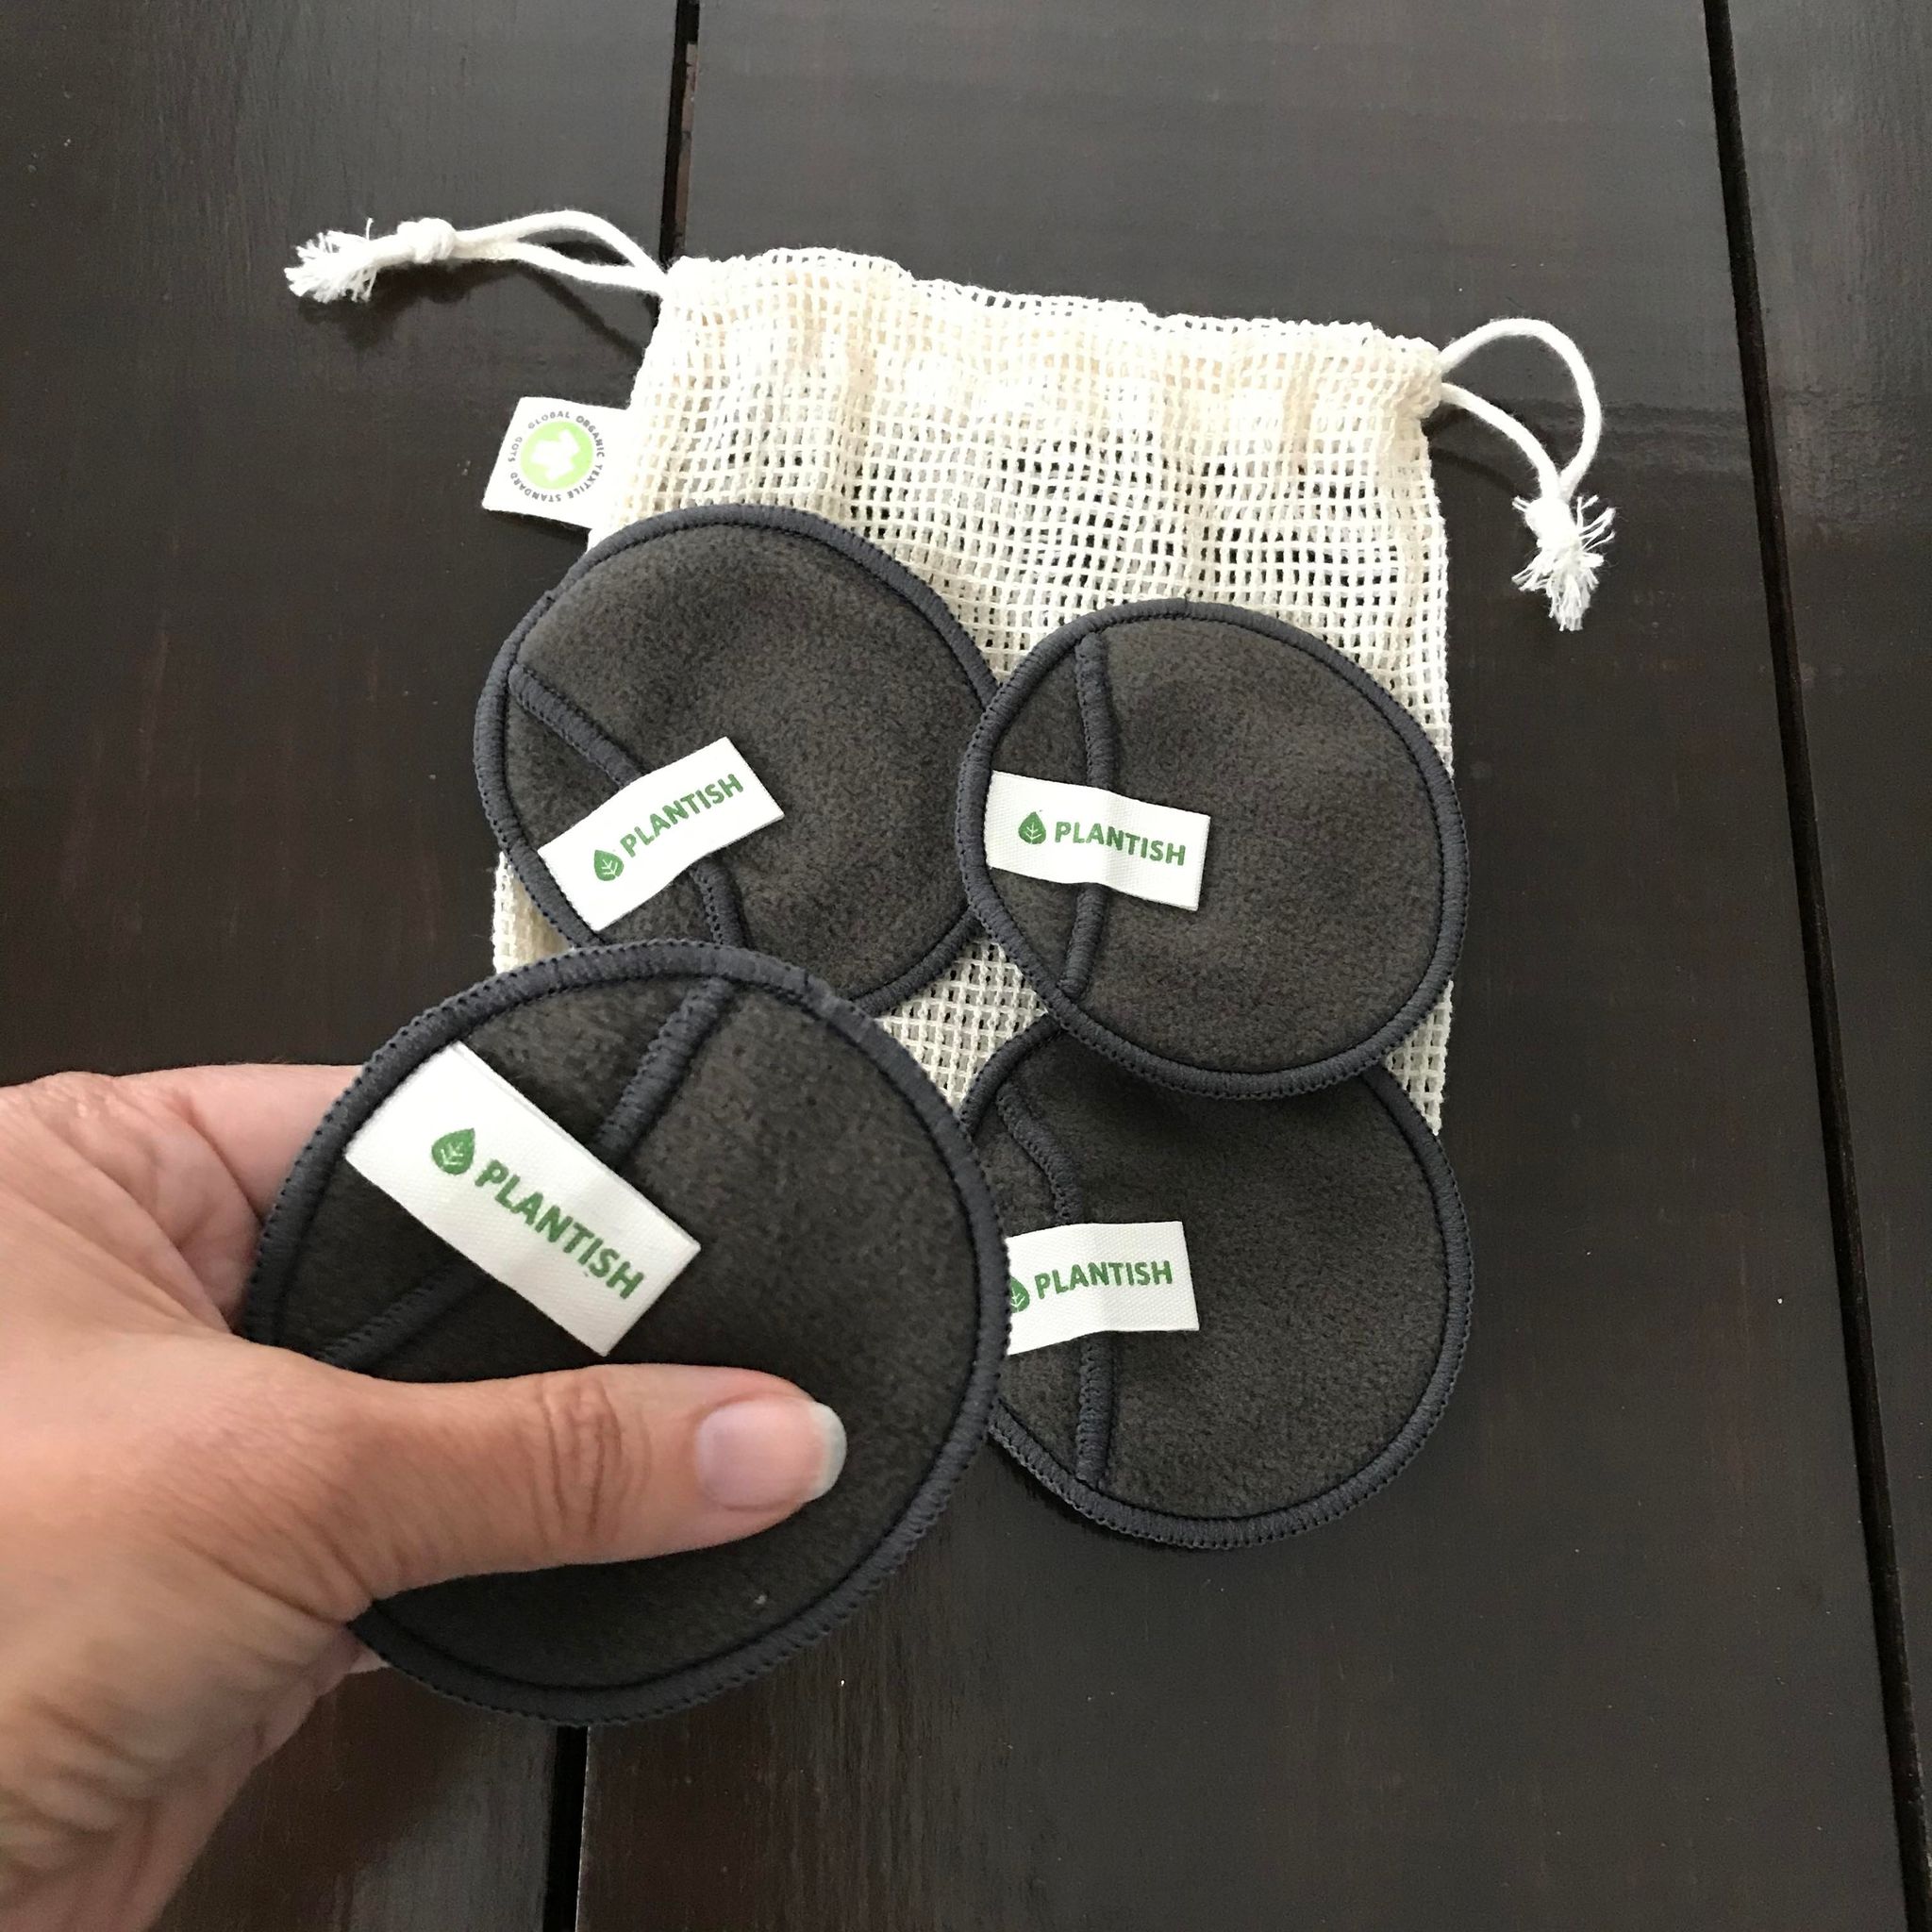 Plantish bamboo charcoal reusable cotton facial pads by Plantish in an mesh organic cotton bag for laundering